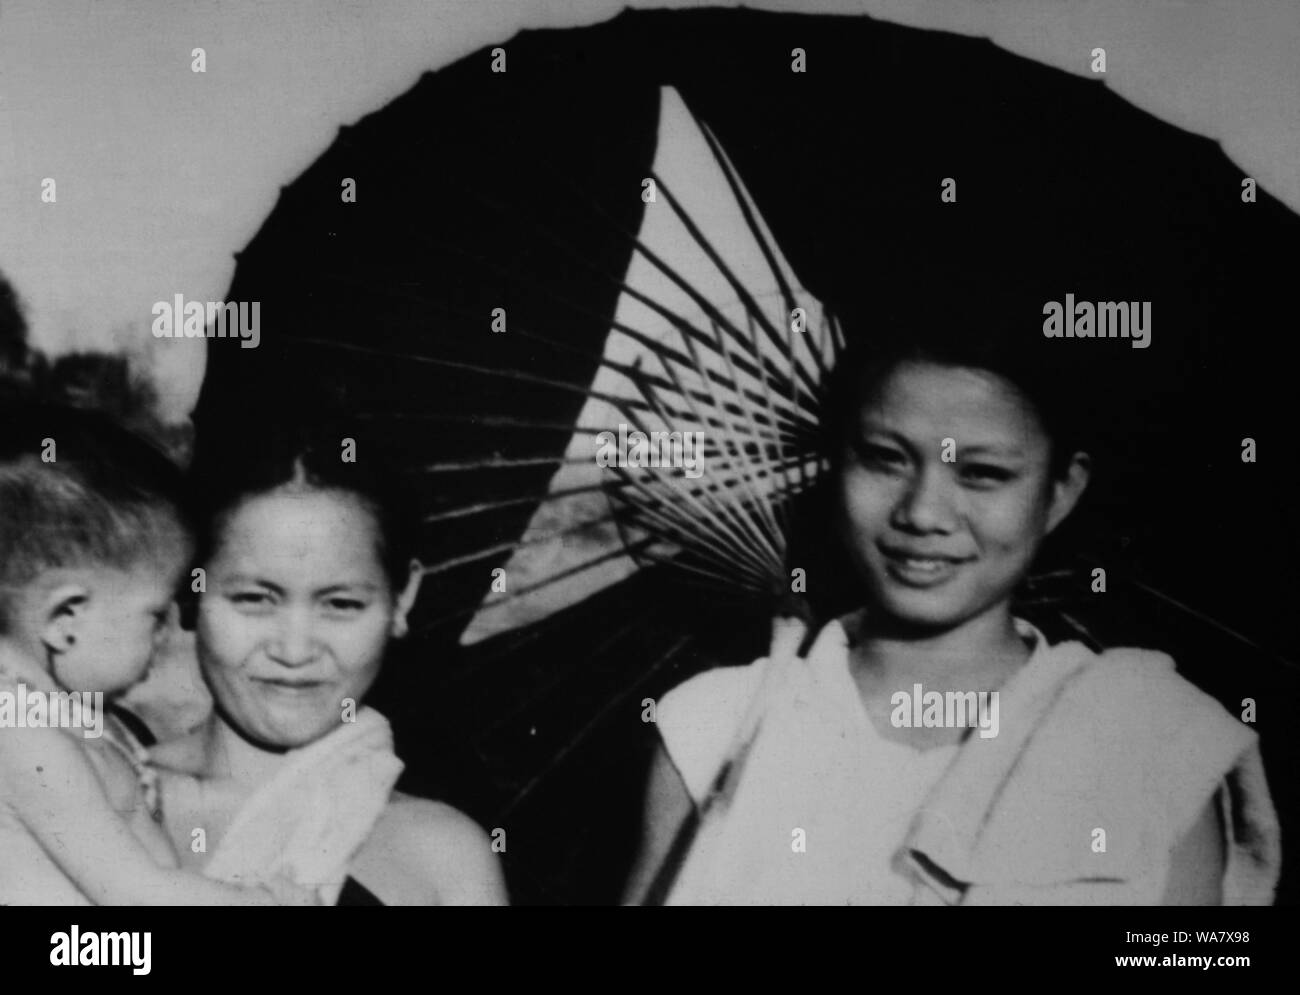 AJAXNETPHOTO. 1953-1957 (APPROX). INDO CHINA. VIETNAM. (IN-COUNTRY LOCATION UNKNOWN.) - TWO WOMEN WITH A CHILD AND TRADITIONAL PARASOL.  PHOTO:JEAN CORRE/AJAXREF:RX7 191508 224 Stock Photo